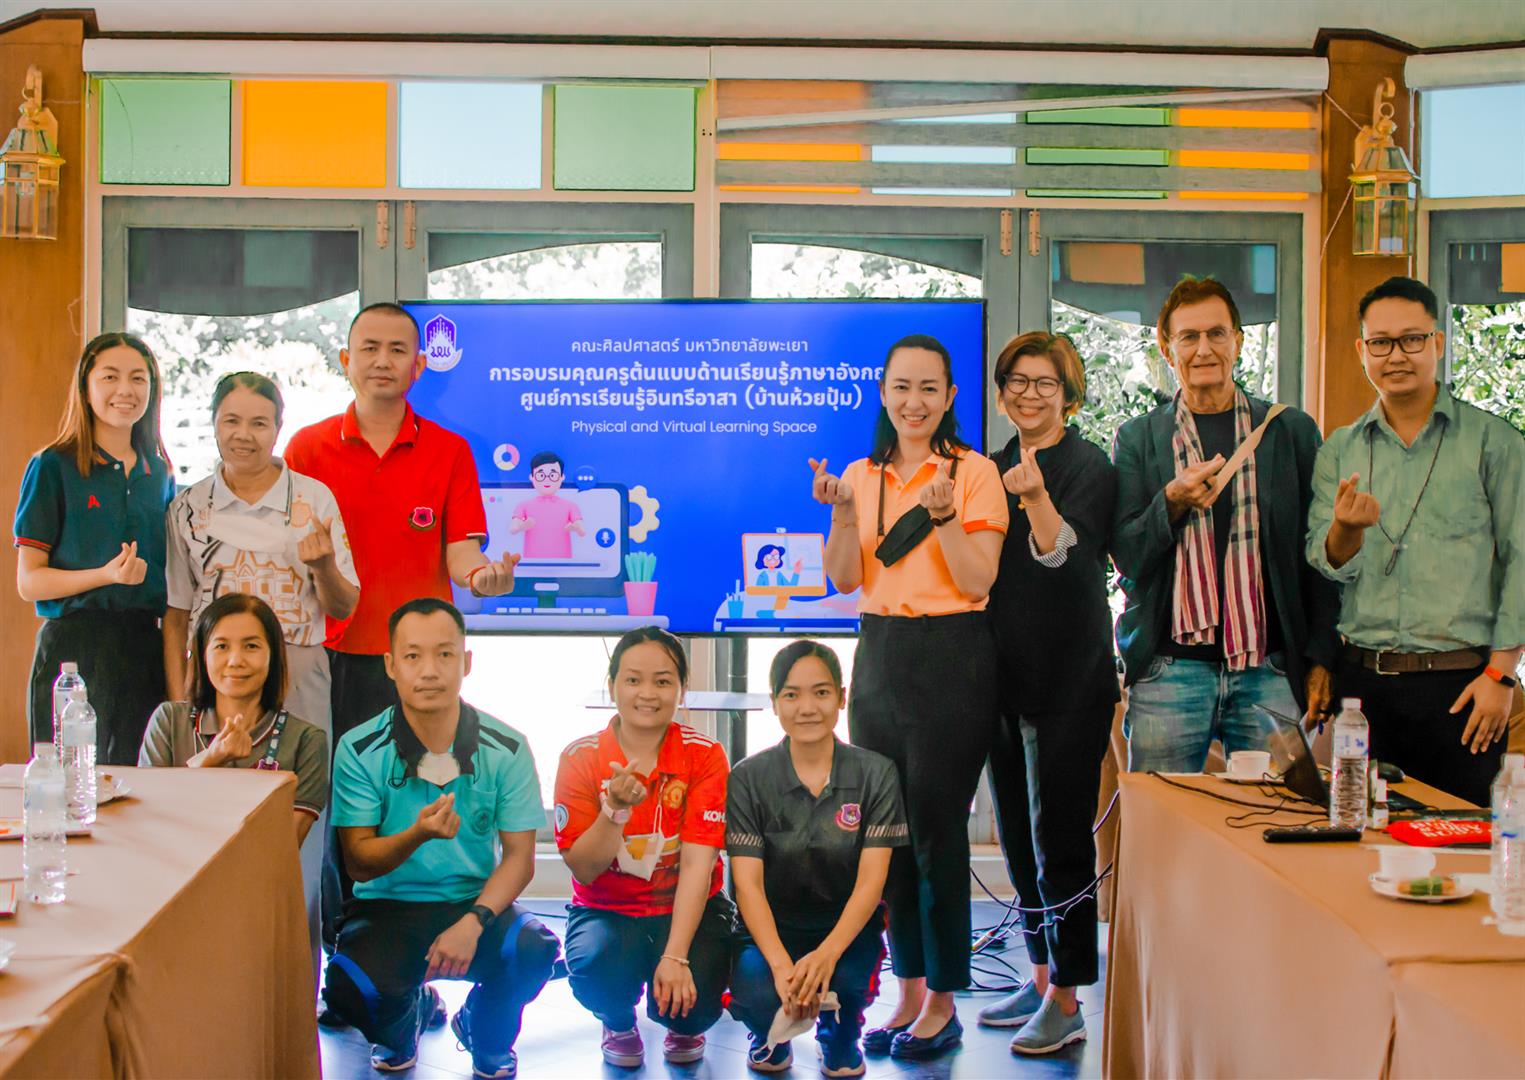 School Of Liberal Arts Conducted A Teacher Training Program For Teachers From INSEE Arsa Border Patrol Police Education Center (Huai Pum Village)